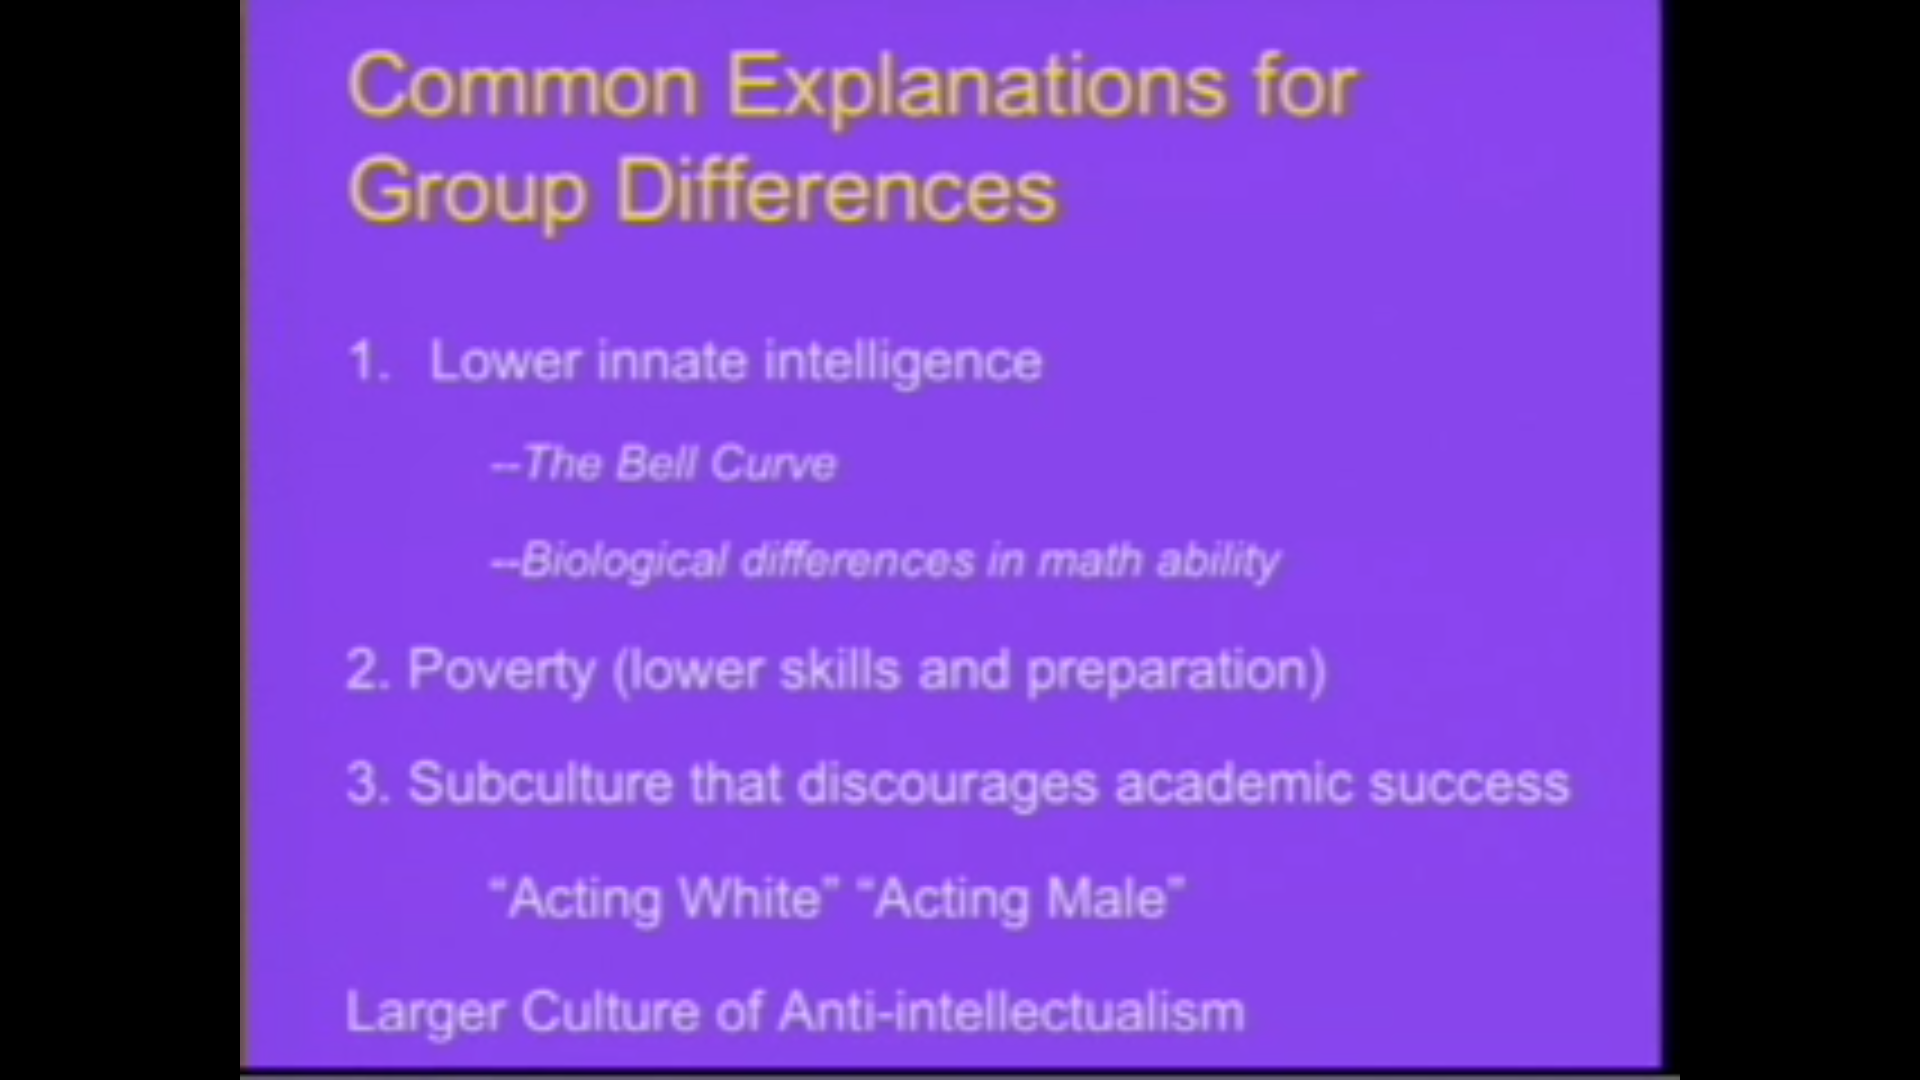 Low numbers: stereotype threat and the performance of women and minorities Thumbnail